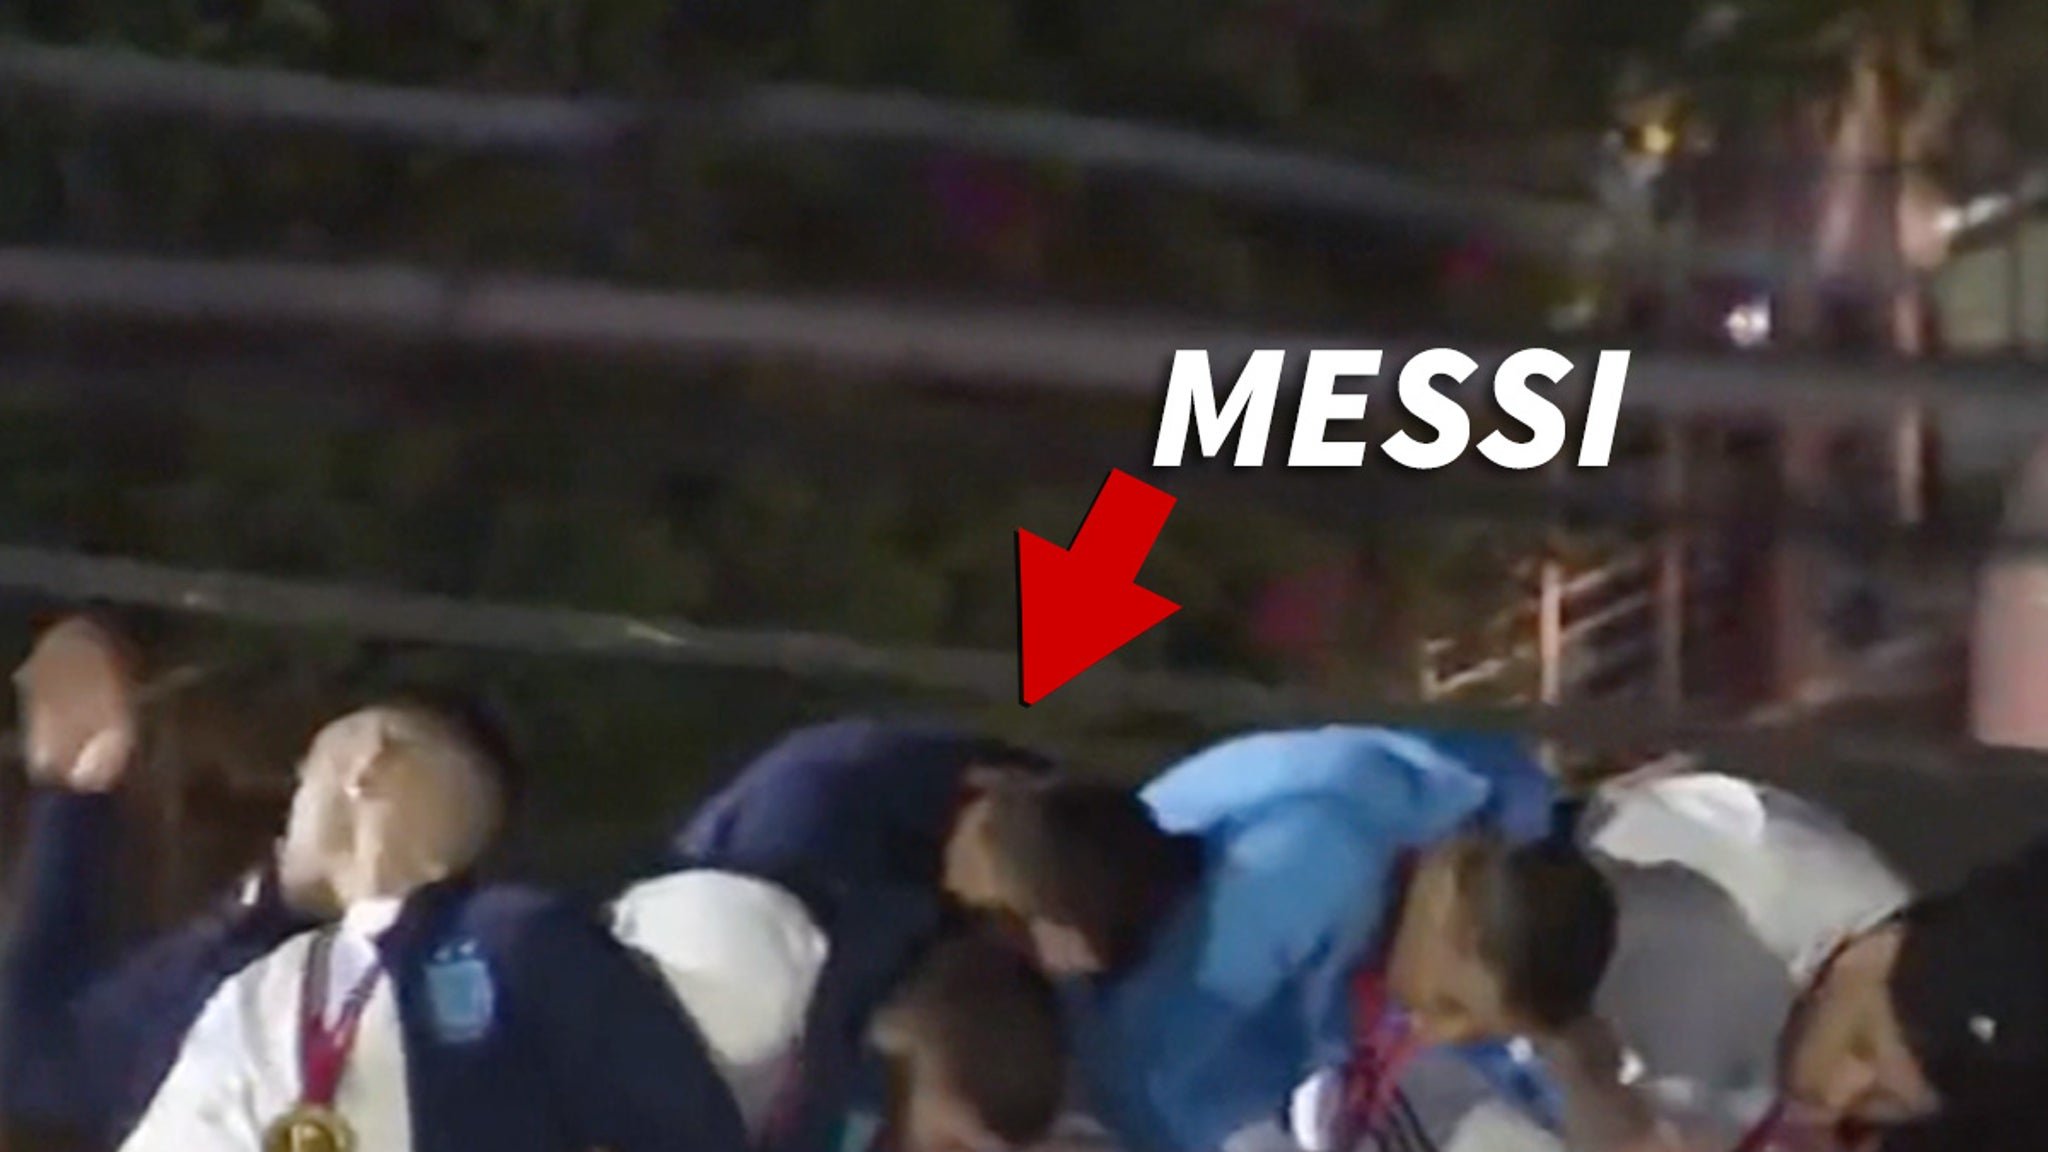 Lionel Messi Nearly Knocked Off Bus At W.C. Parade ... Star Narrowly Avoids Disaster